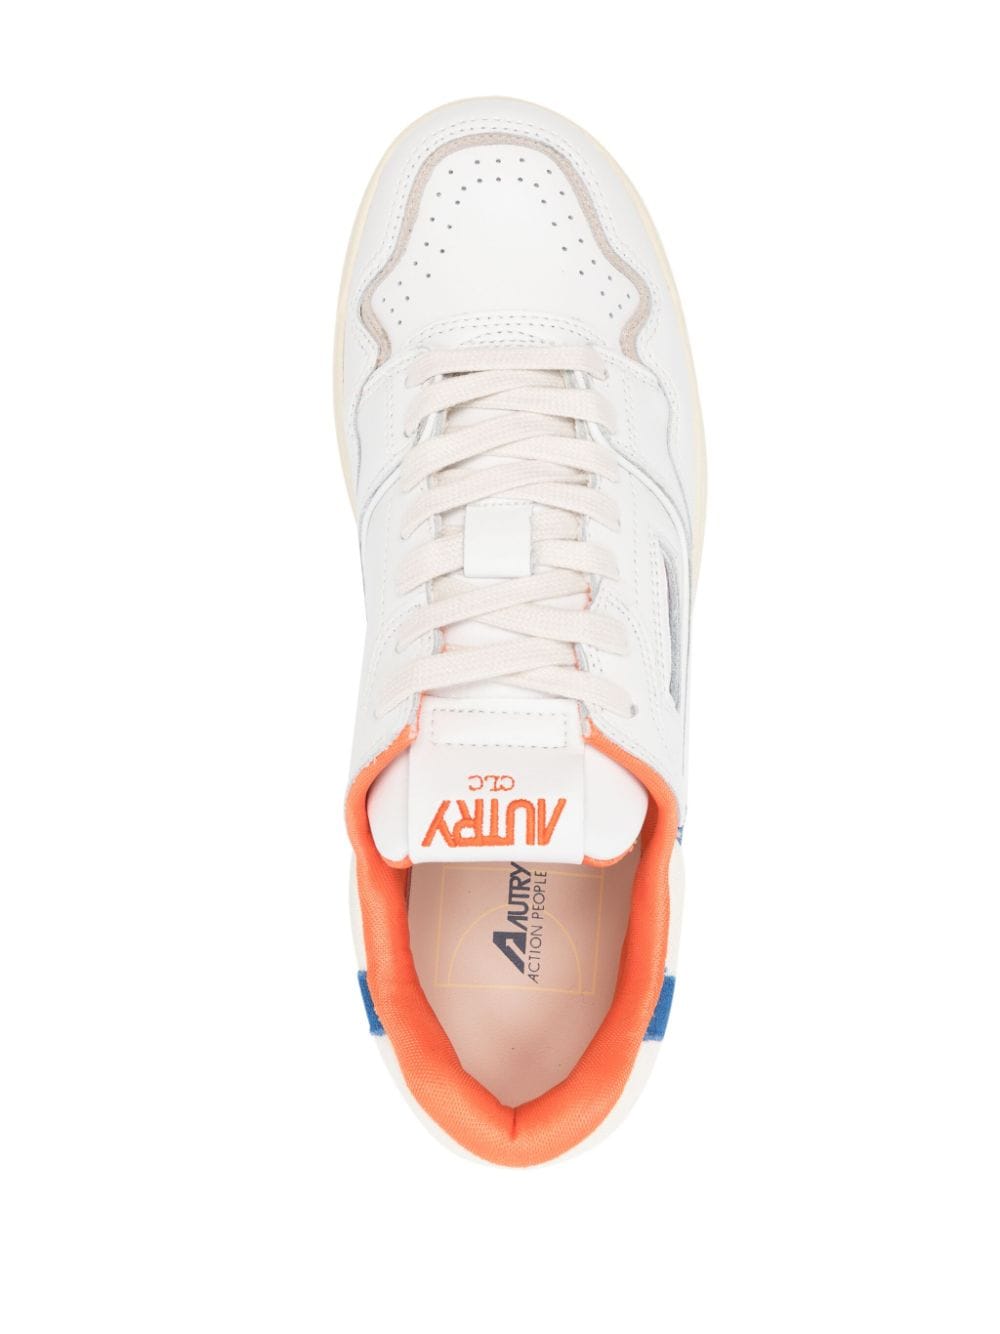 white medialist clc sneaker with blue and orange inserts